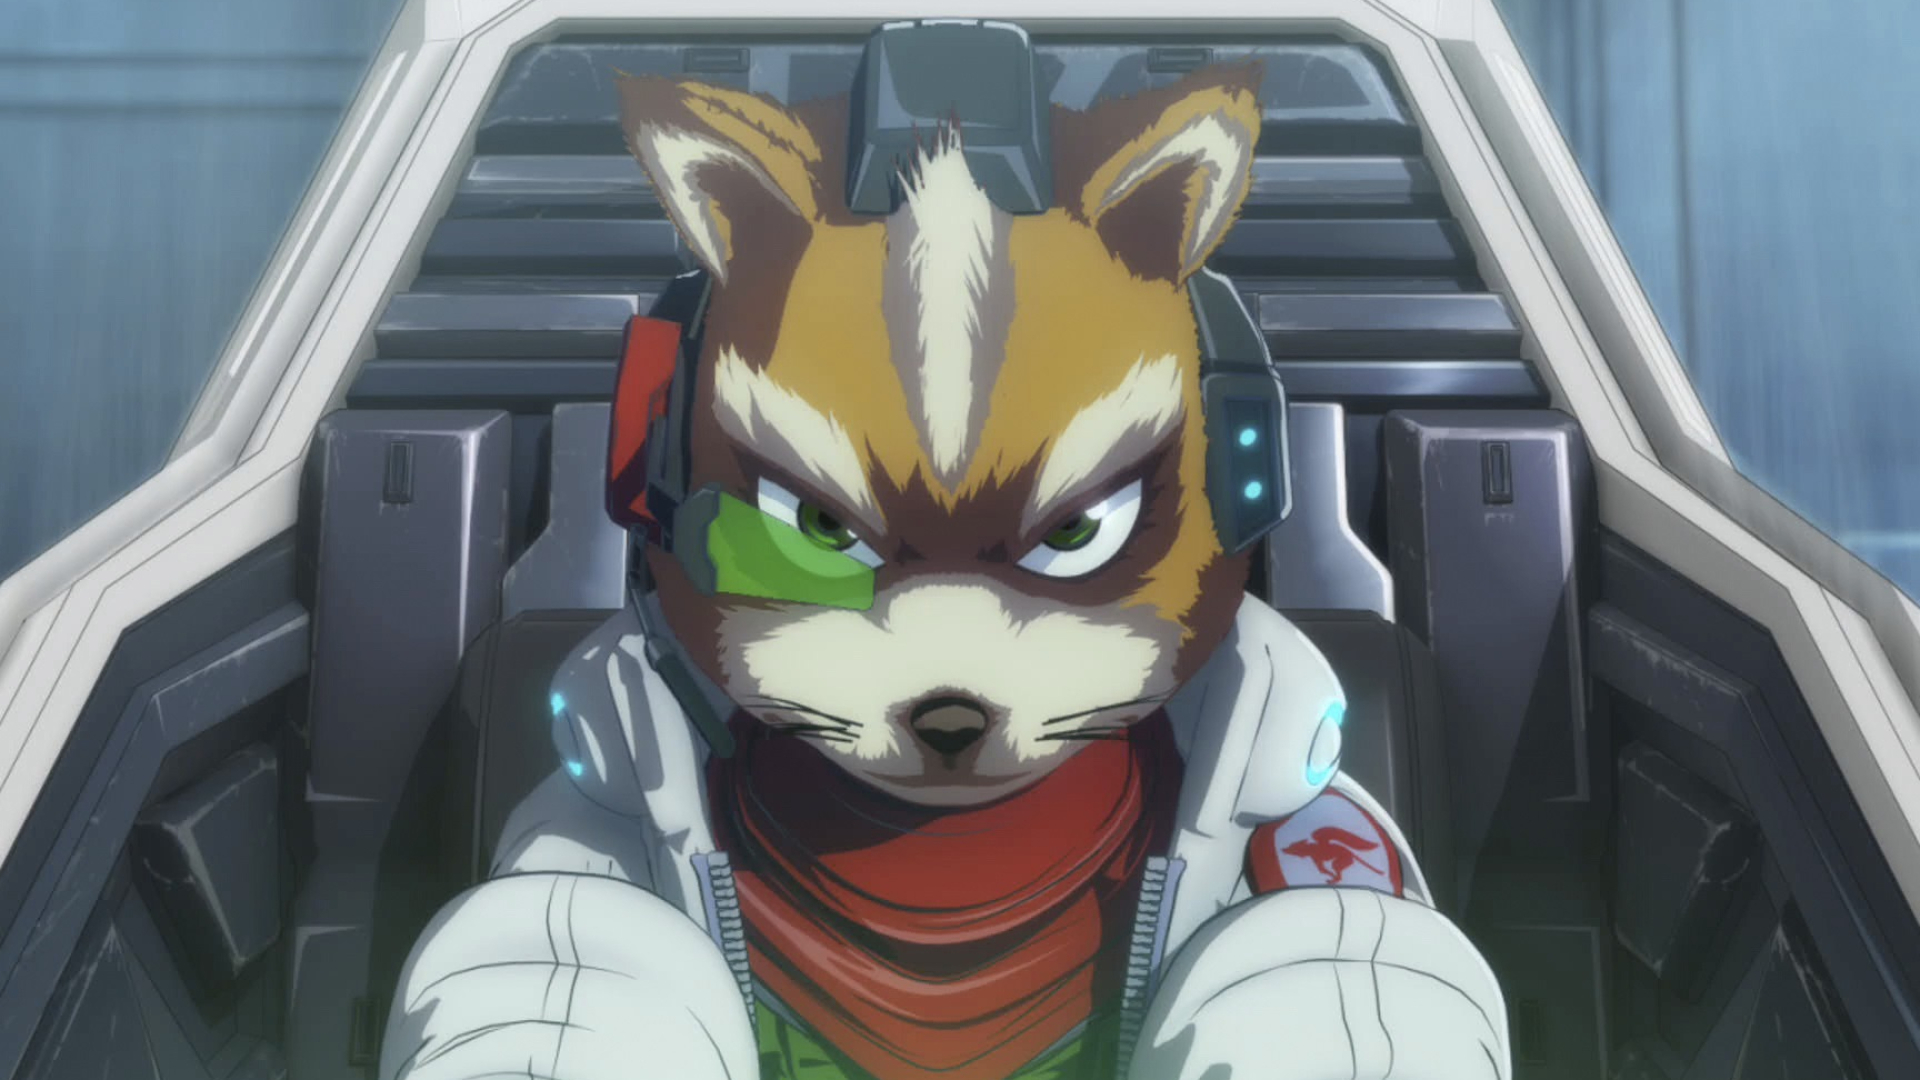 1920x1080 Star Fox Zero Is in the Next Nintendo Wallpapers and Zoom Backgrounds